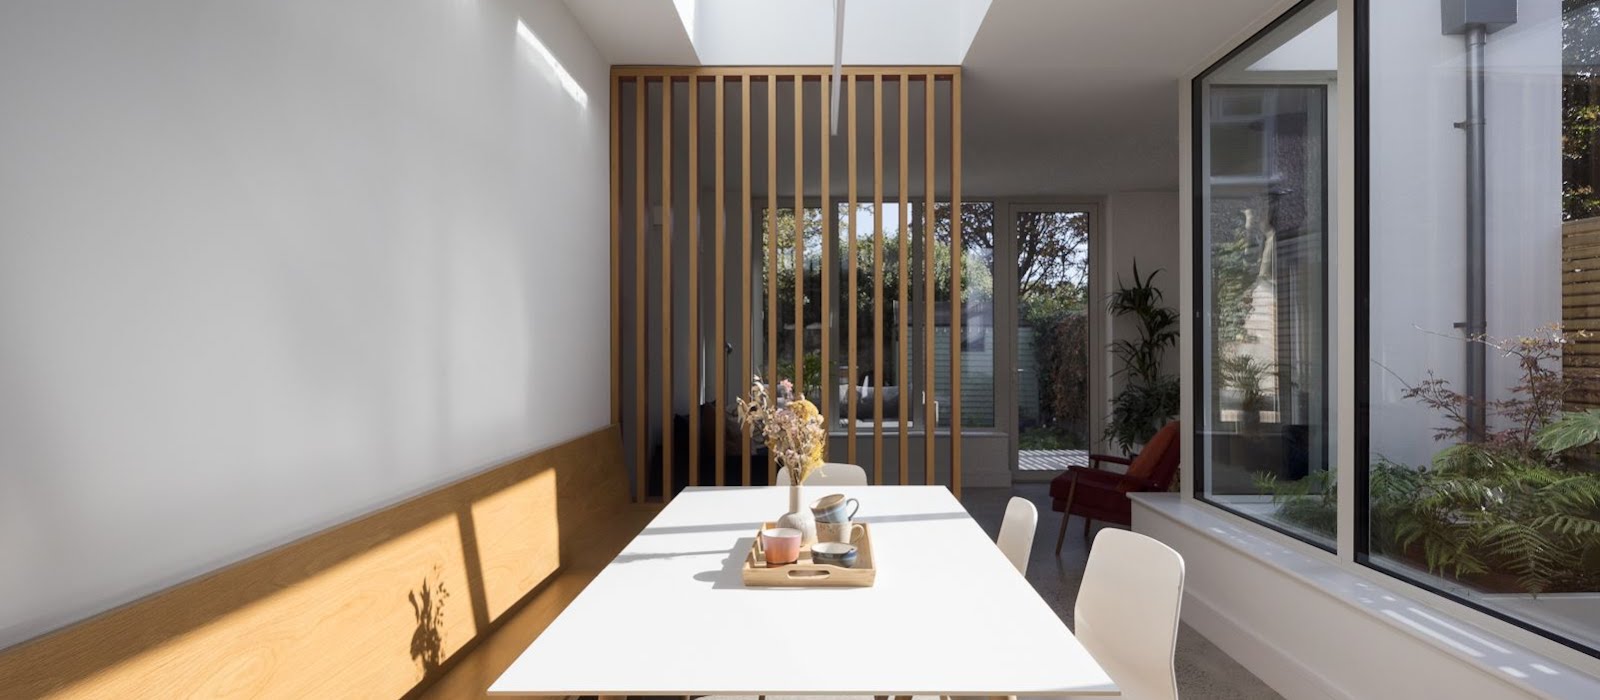 An extension to this Rathfarnham house has created different zones and a connection to the garden